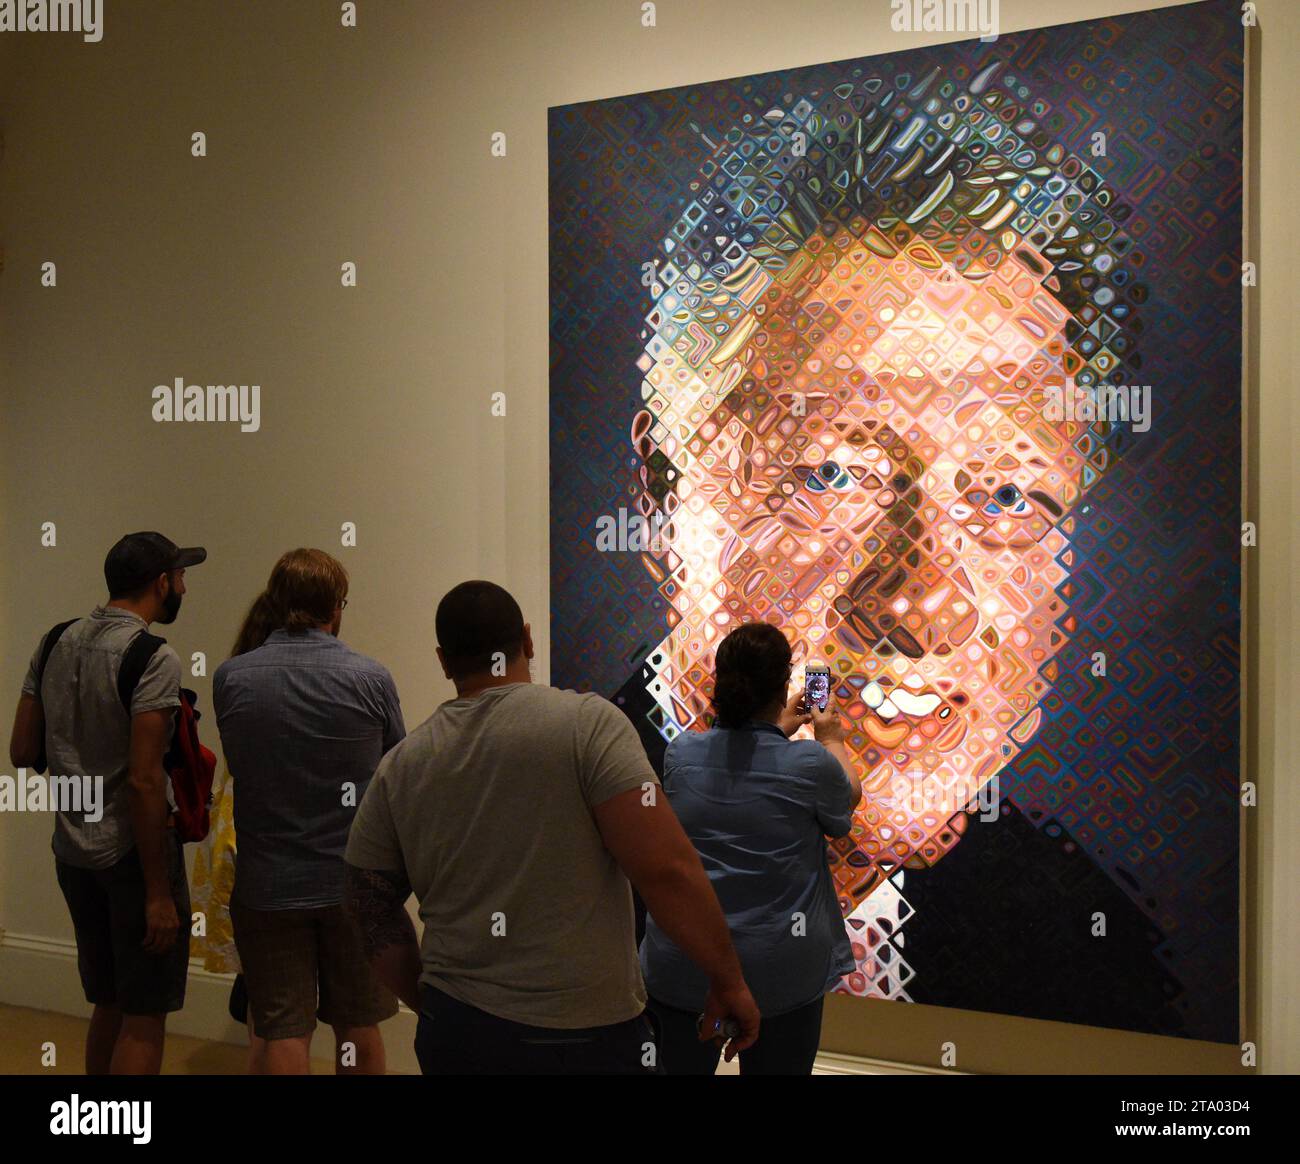 Washington, DC - June 02, 2018: People near the portrait of the 42nd president of the United States Bill Clinton by Chuck Close in National Portrait G Stock Photo